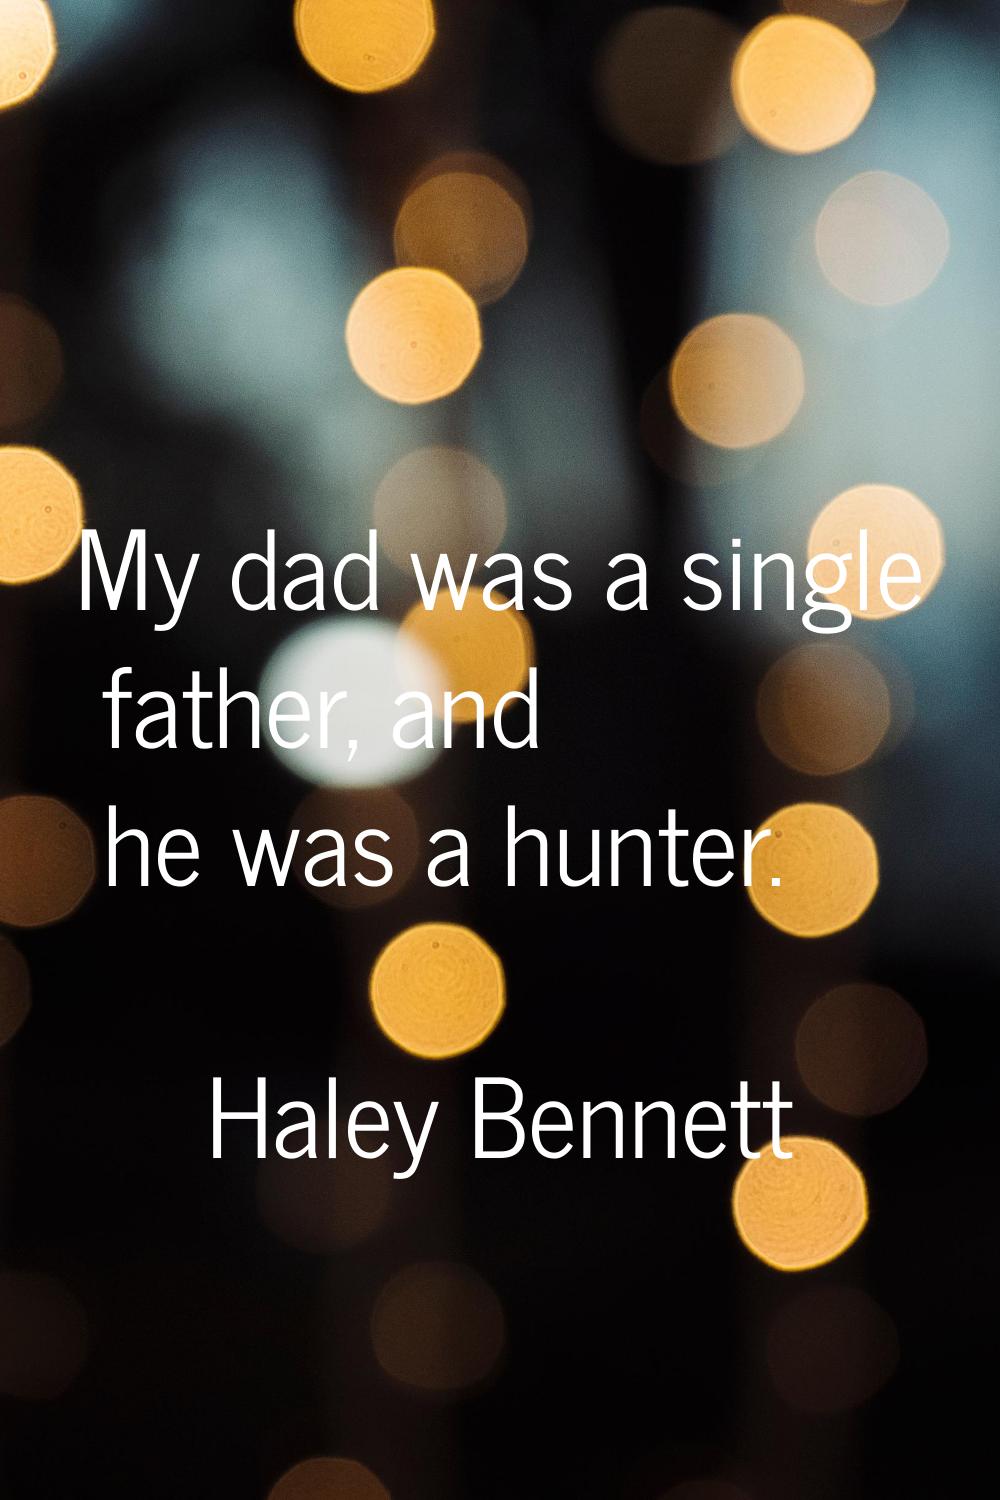 My dad was a single father, and he was a hunter.